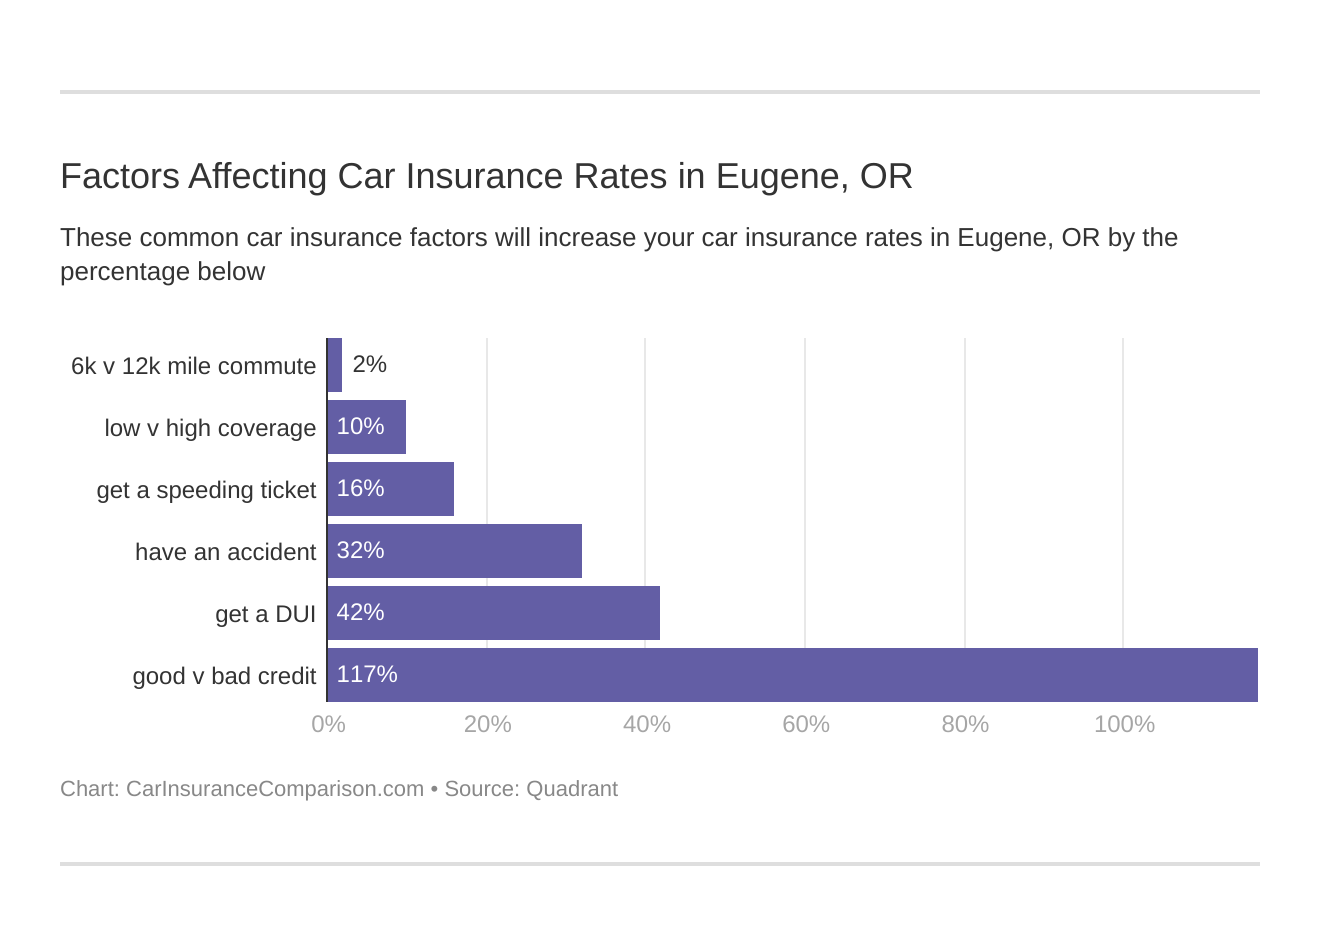 Factors Affecting Car Insurance Rates in Eugene, OR